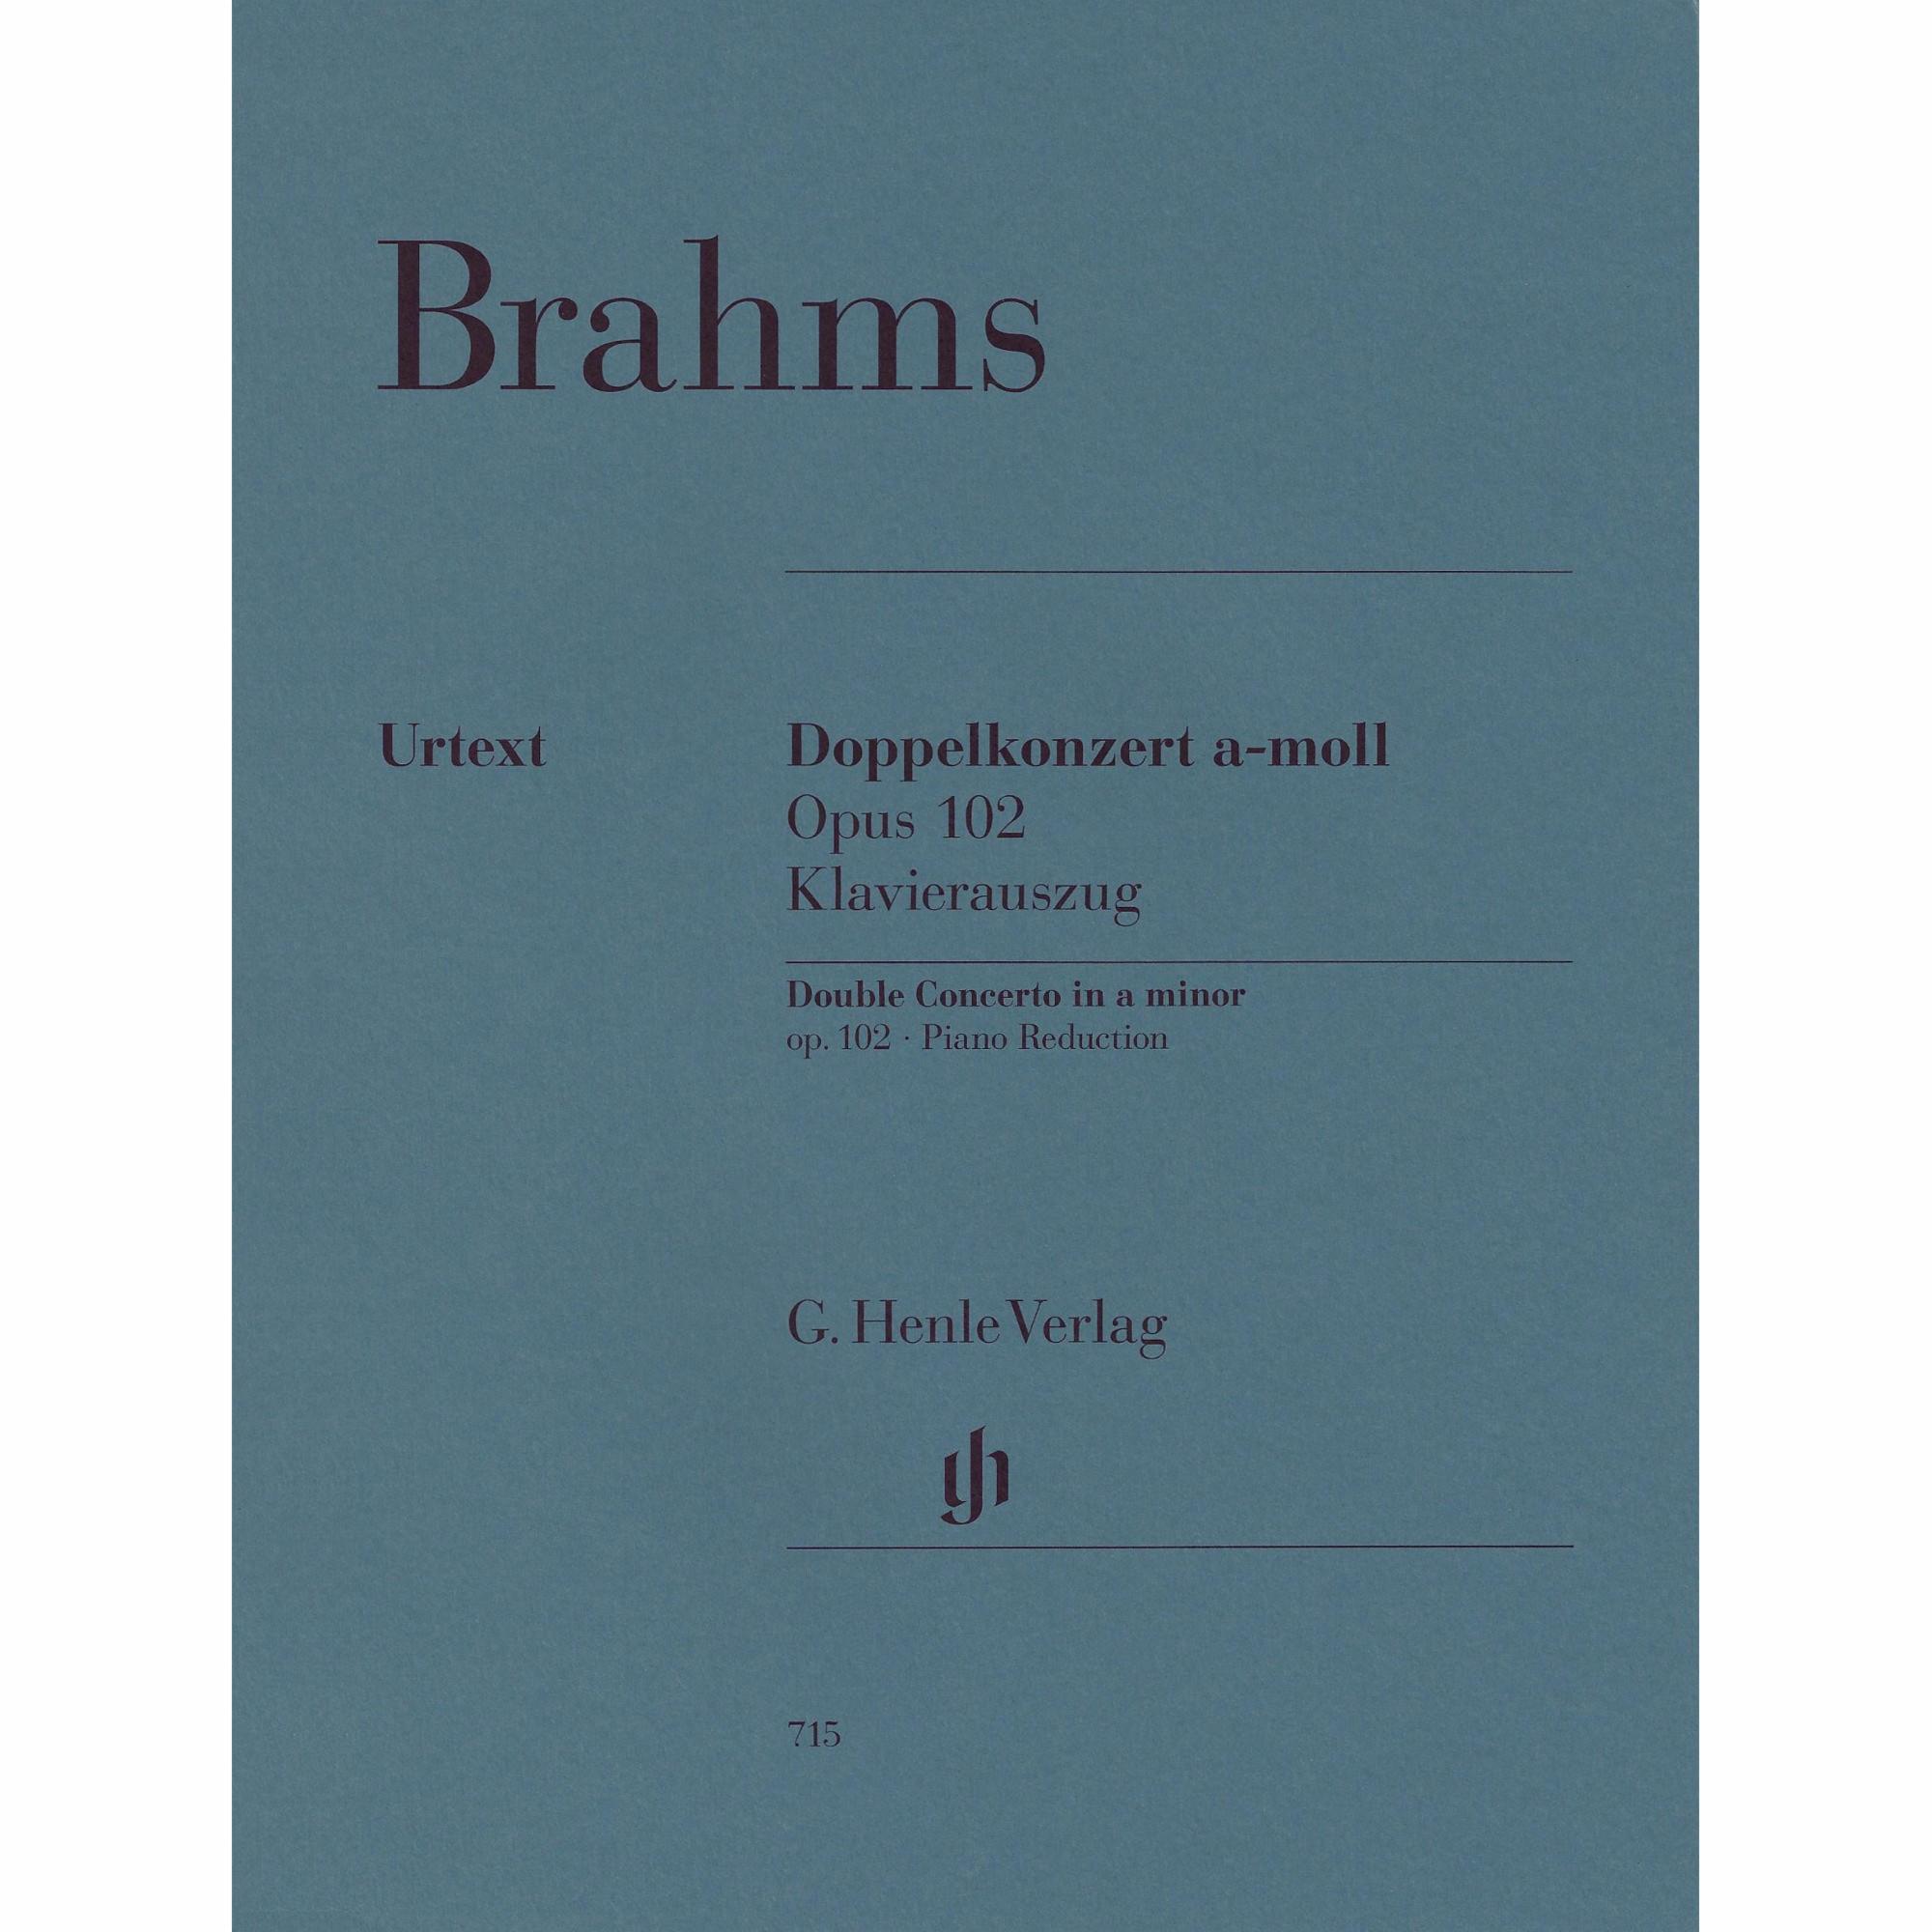 Brahms -- Double Concerto in A Minor, Op. 102 for Violin, Cello, and Piano